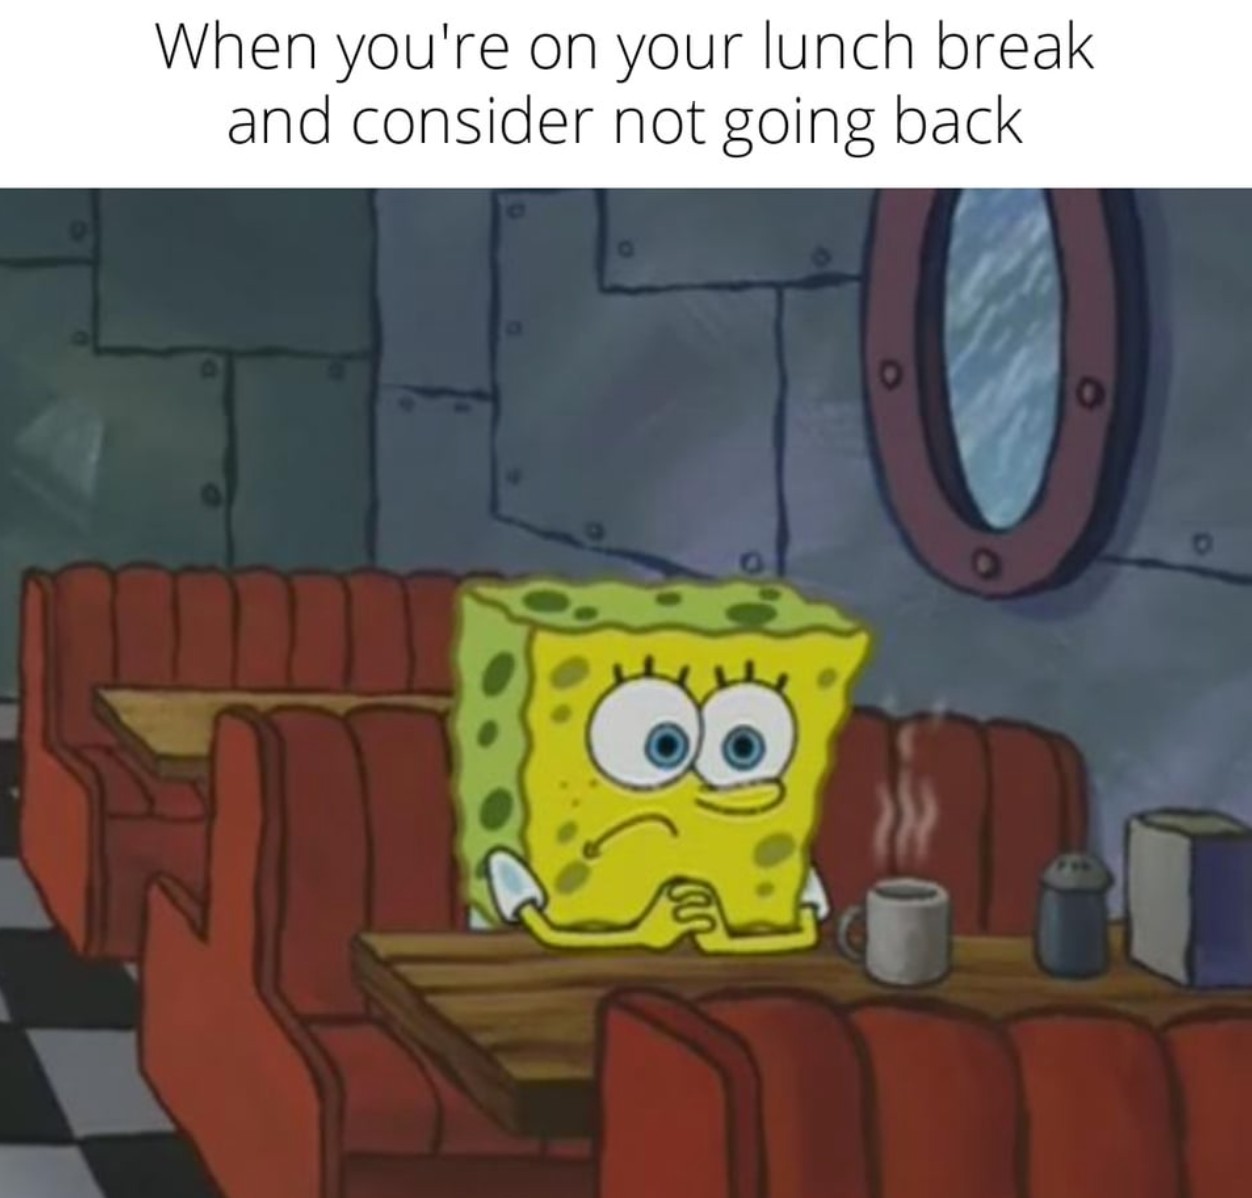 when you're on your lunch break and consider not going back, spongebob